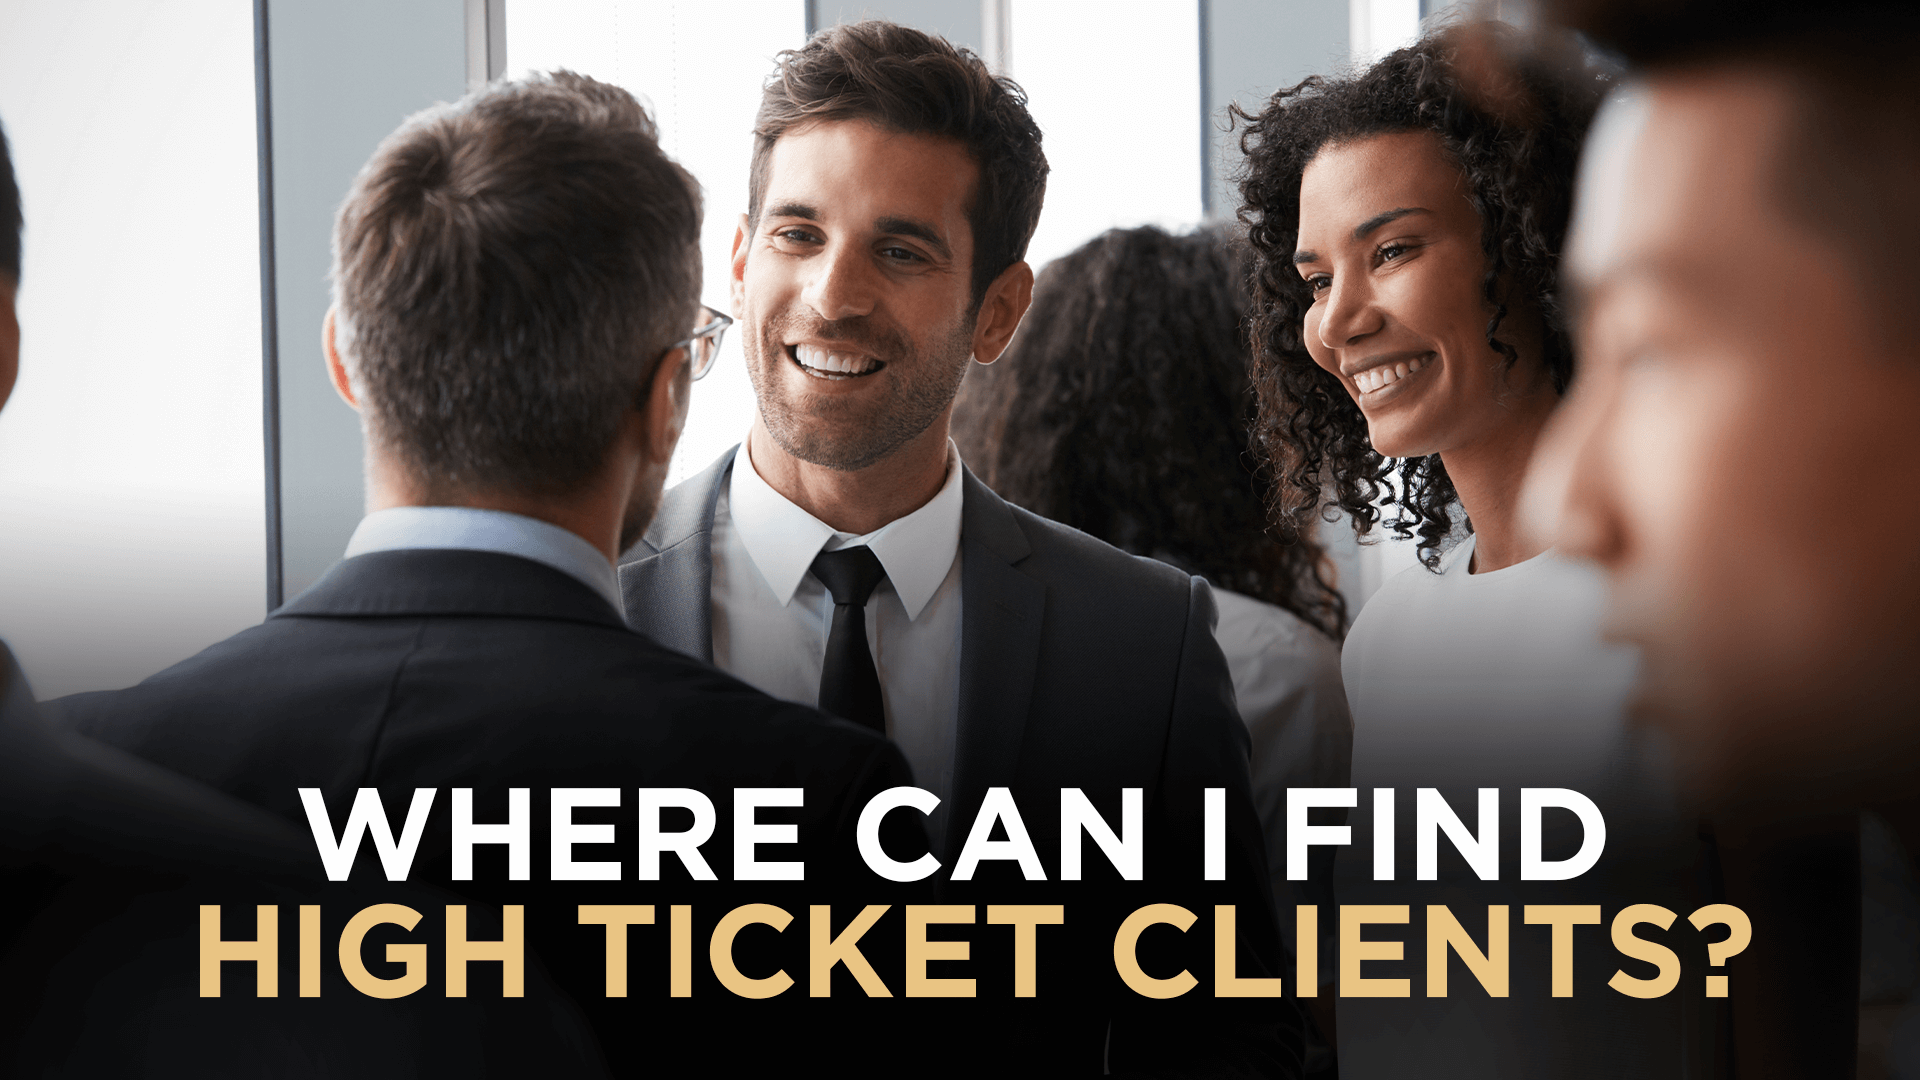 Where Can I Find High Ticket Clients